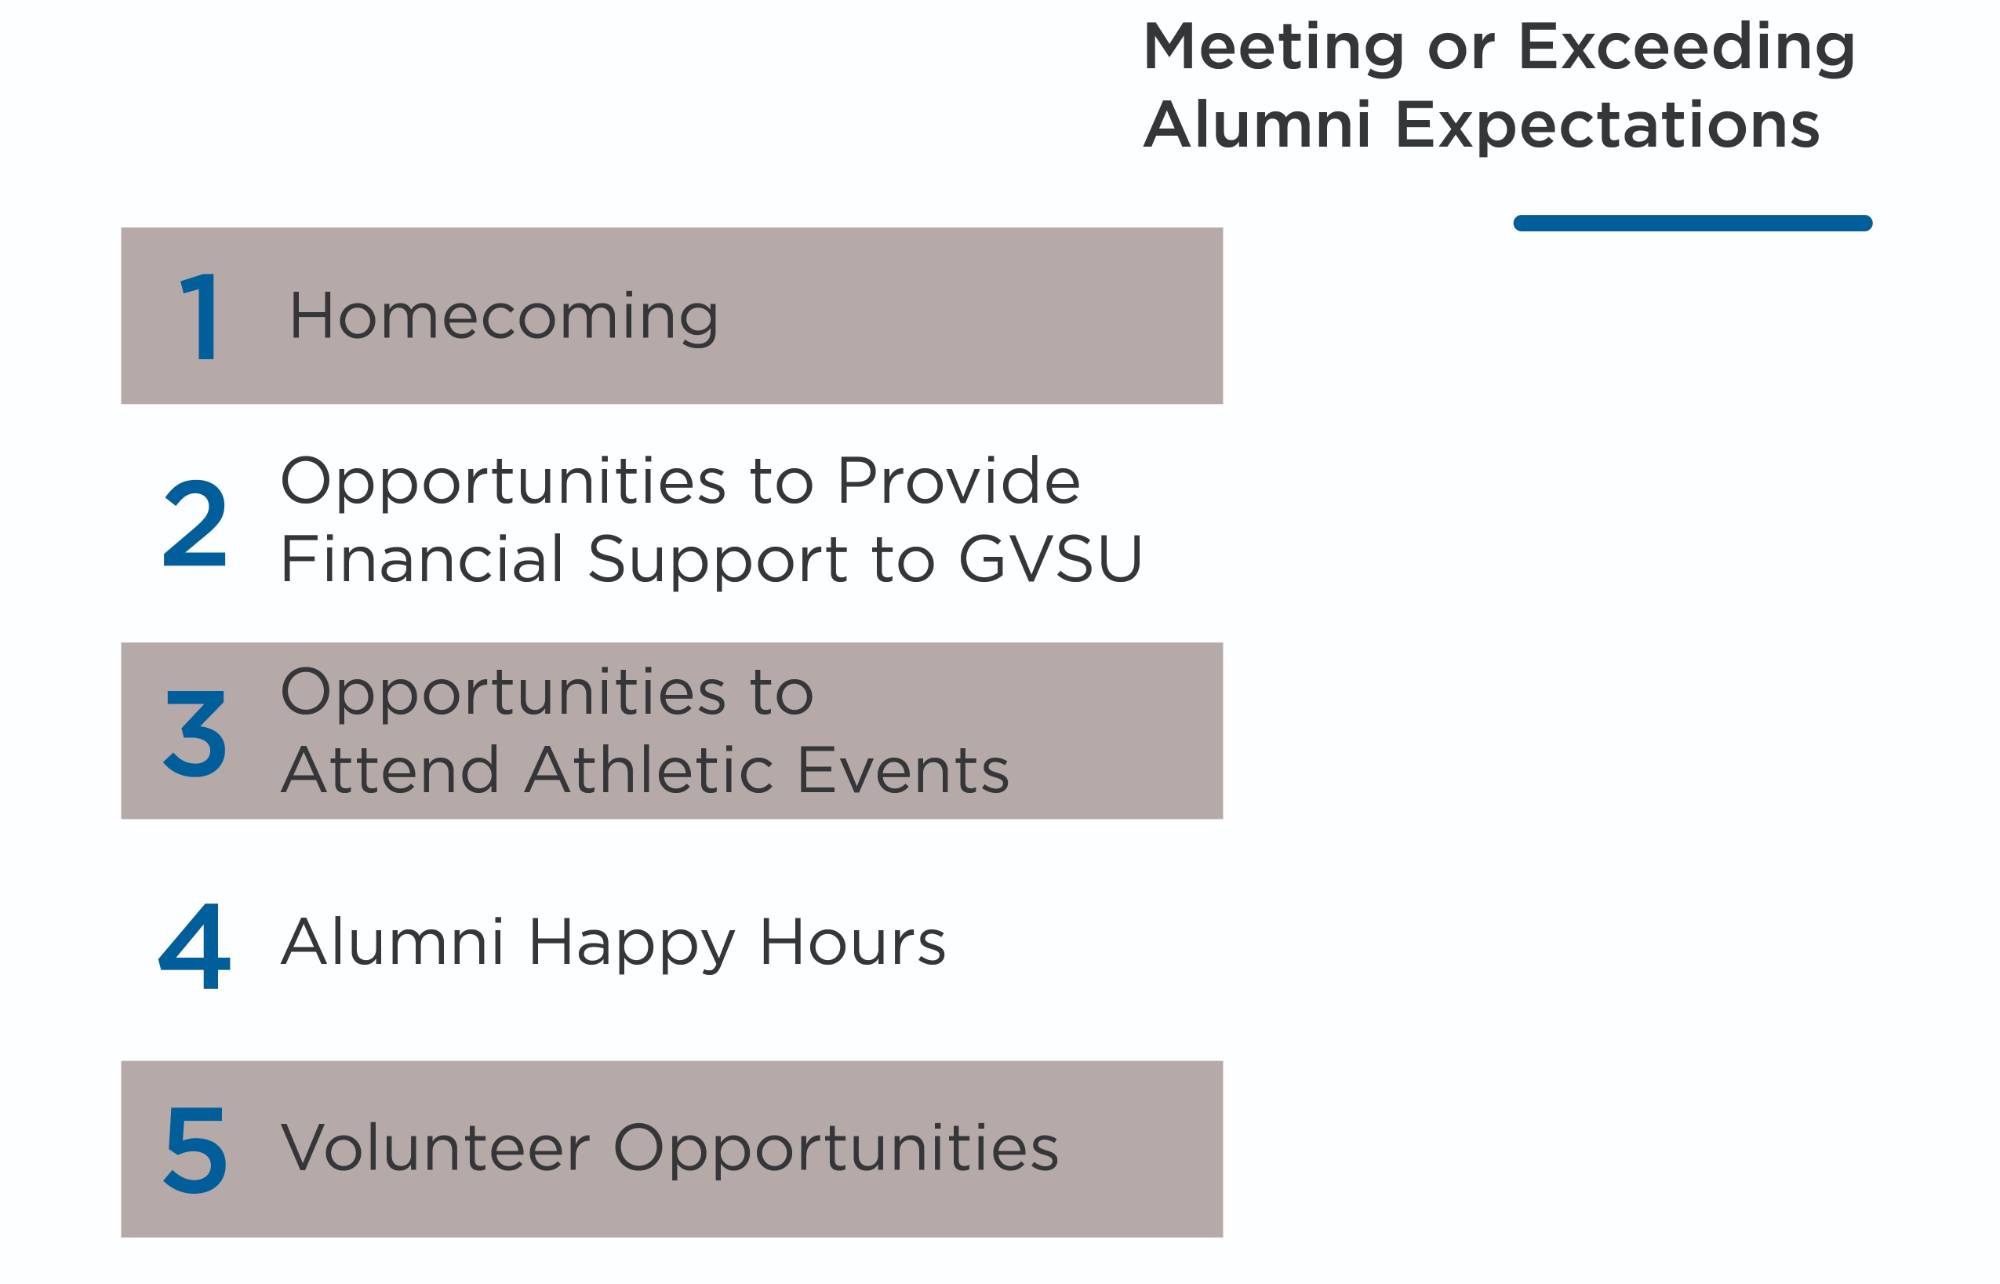 Meeting or Exceeding Alumni Expectations. 1. Homecoming 2. Opportunities to Provide Financial Support to GVSU 3. Opportunities to Attend Athletic Events 4. Alumni Happy Hour 5. Volunteer Opportunities.